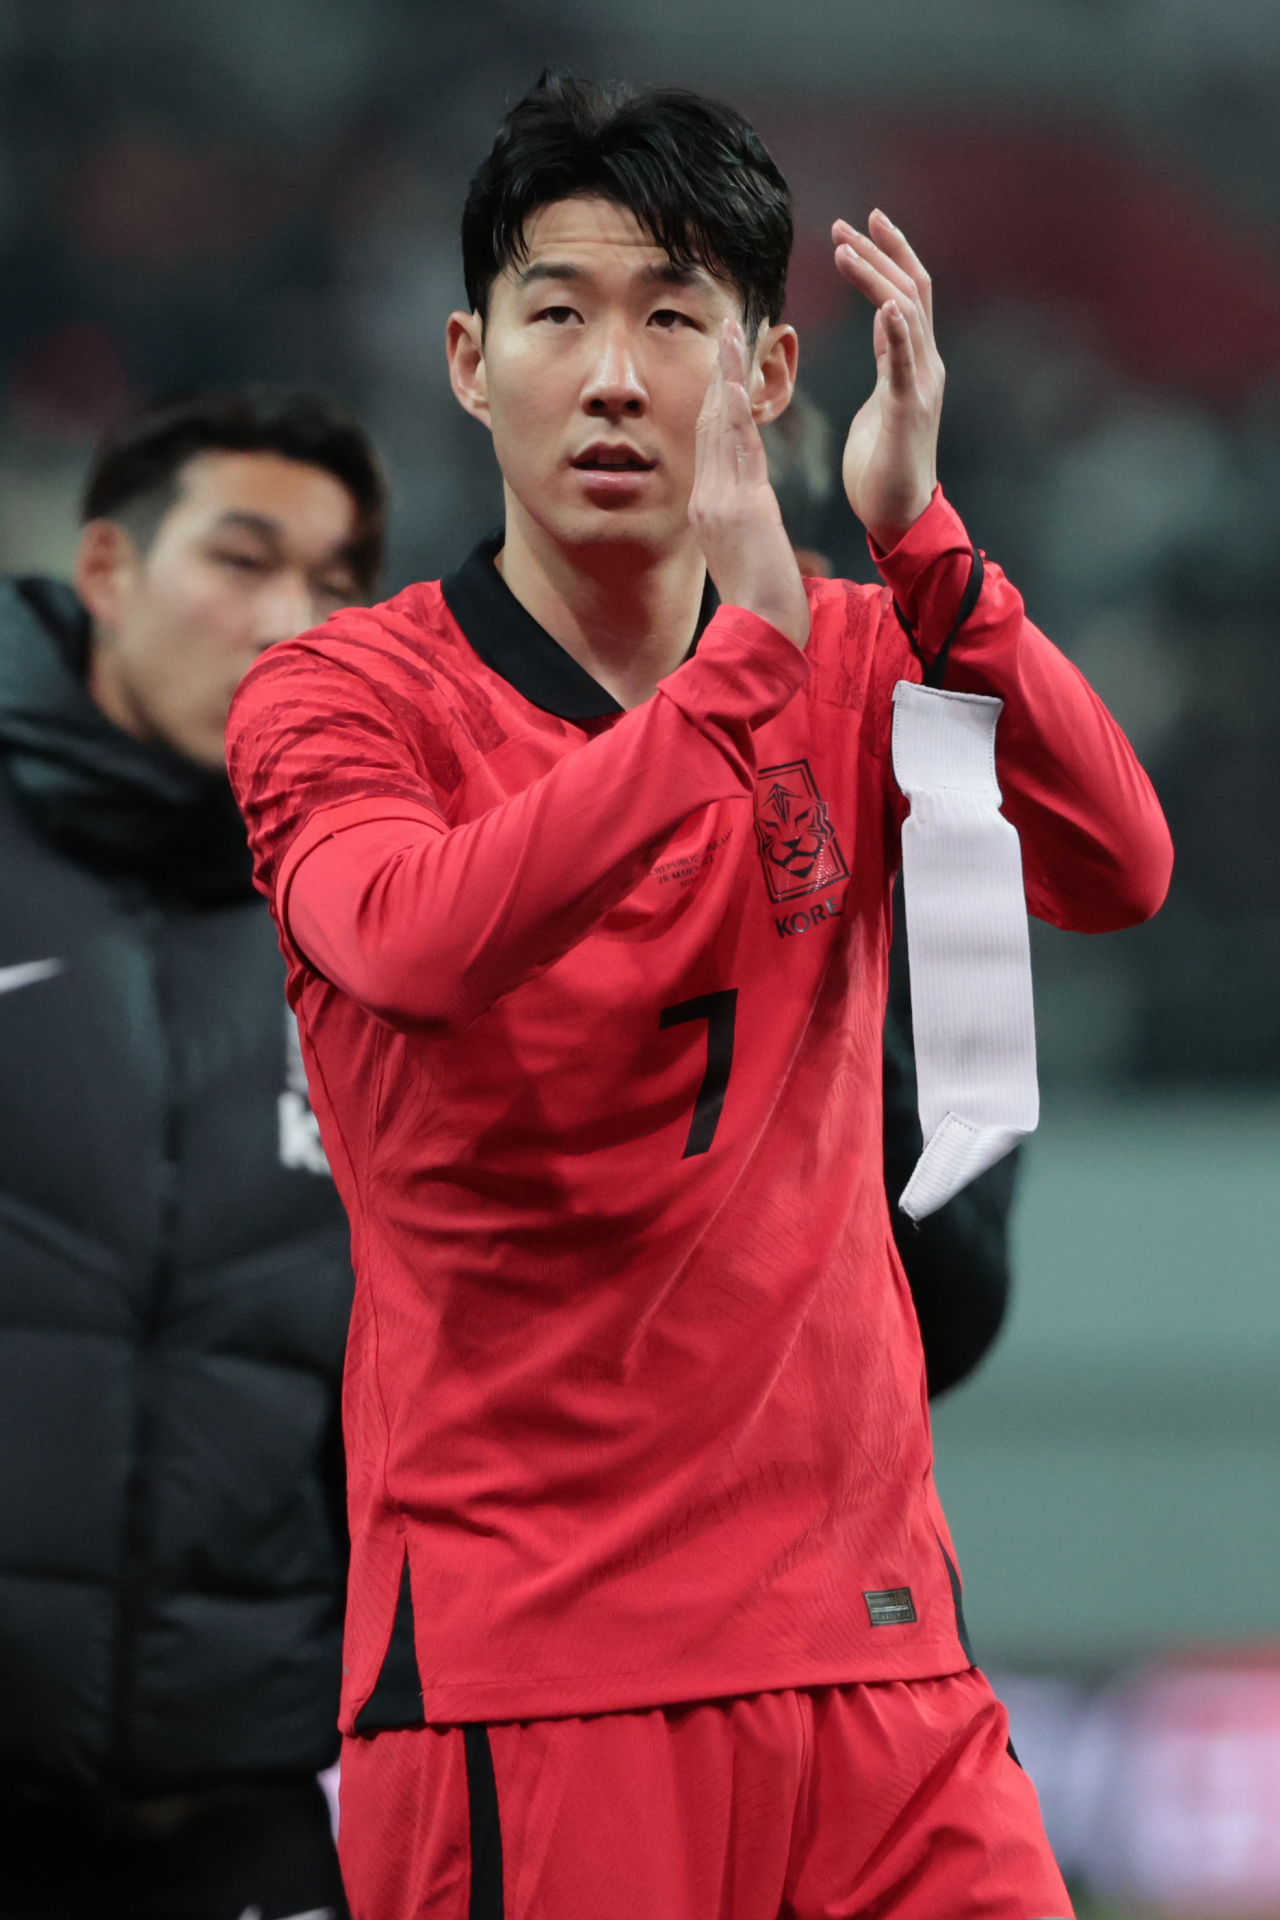 Son Heung-min, the captain of the national team, is seen greeting his fans at the end of the friendly match against Uruguay last Tuesday. (Yonhap)